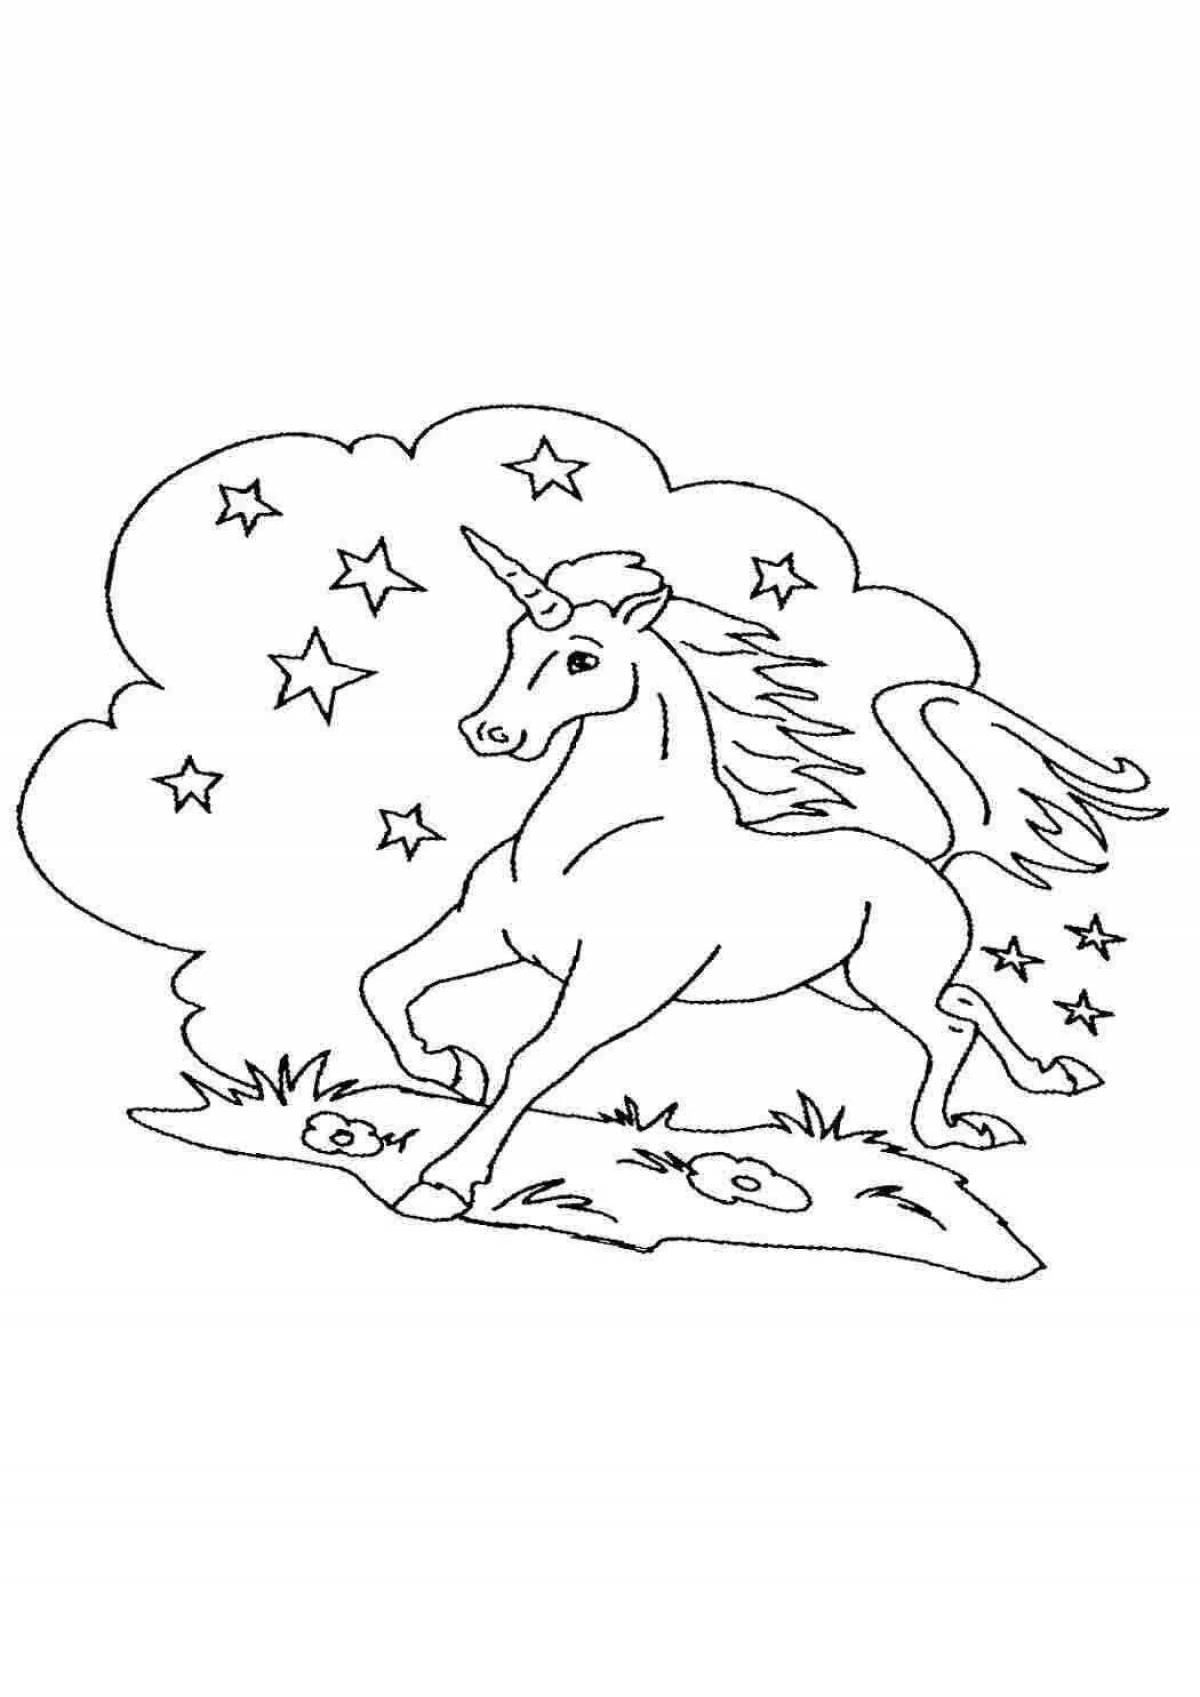 A lovely unicorn coloring book for kids